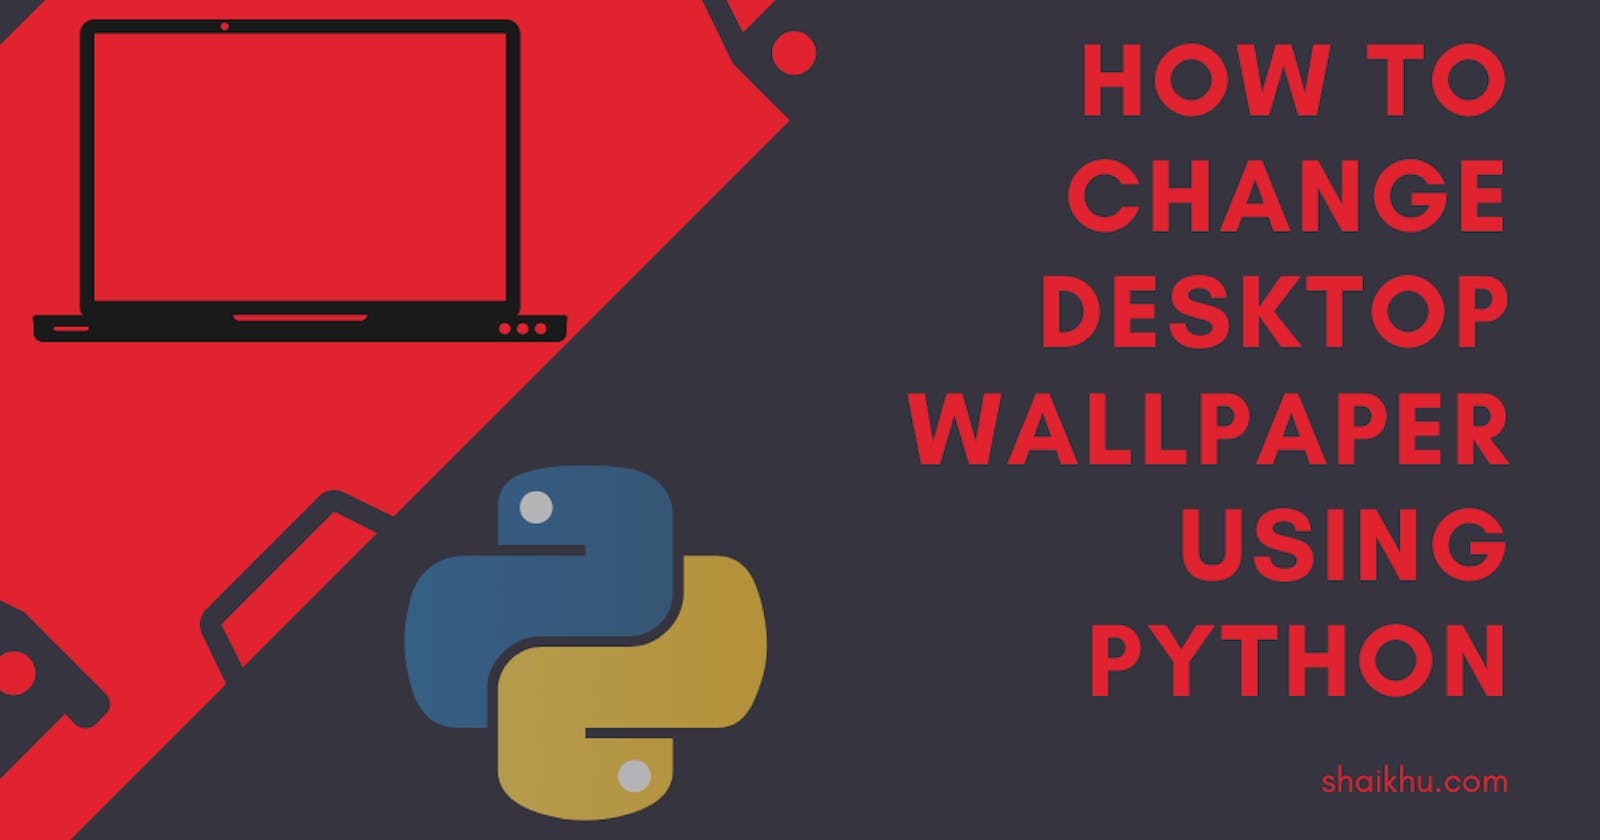 How to auto change desktop wallpaper every minute using Python